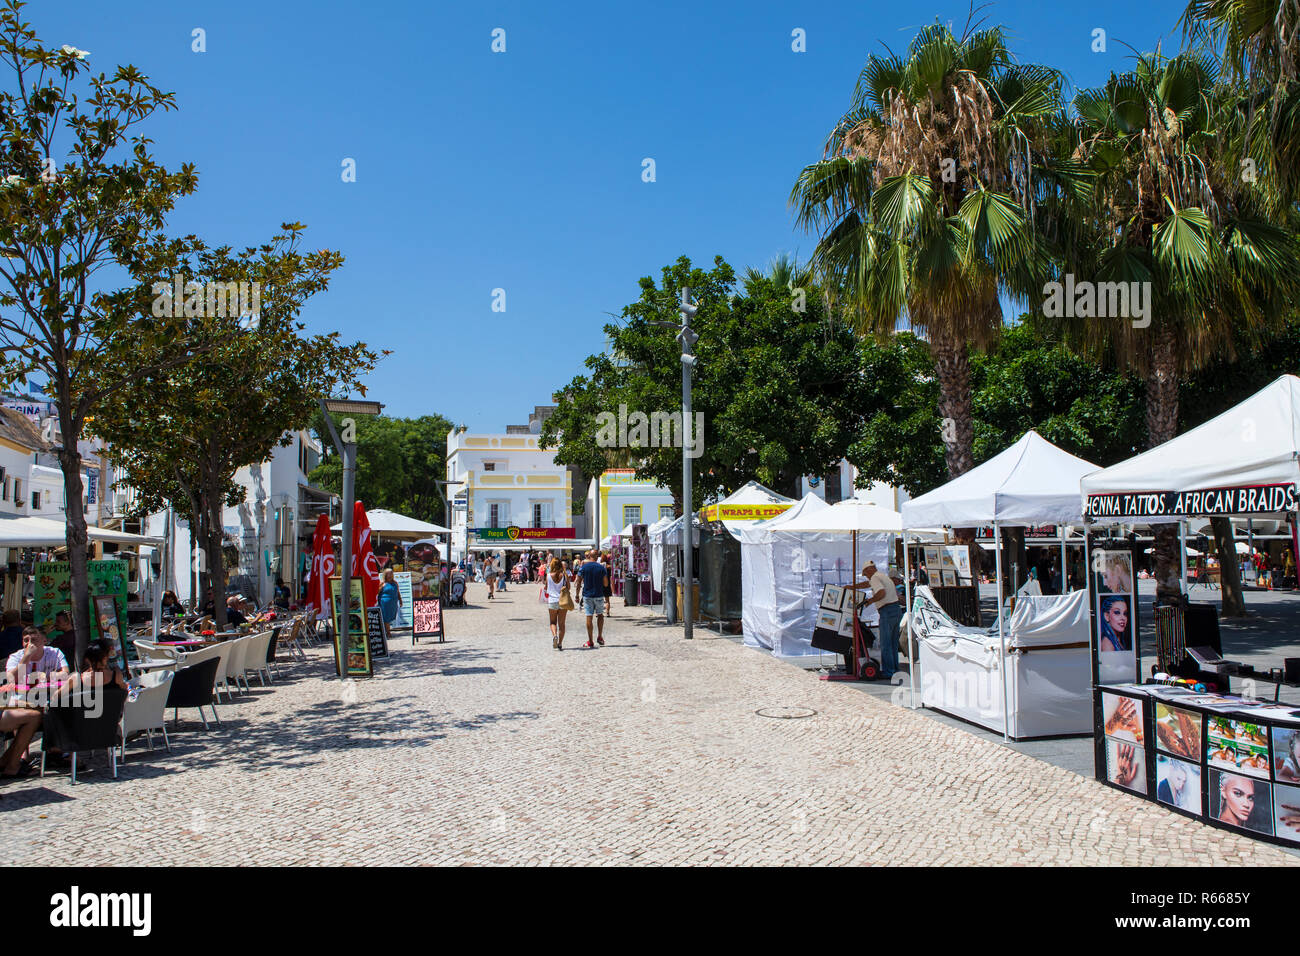 ALBUFEIRA, PORTUGAL - JULY 13TH 2018: A view of one of the streets in the old town area of Albufeira in Portugal, on 13th July 2018. Stock Photo